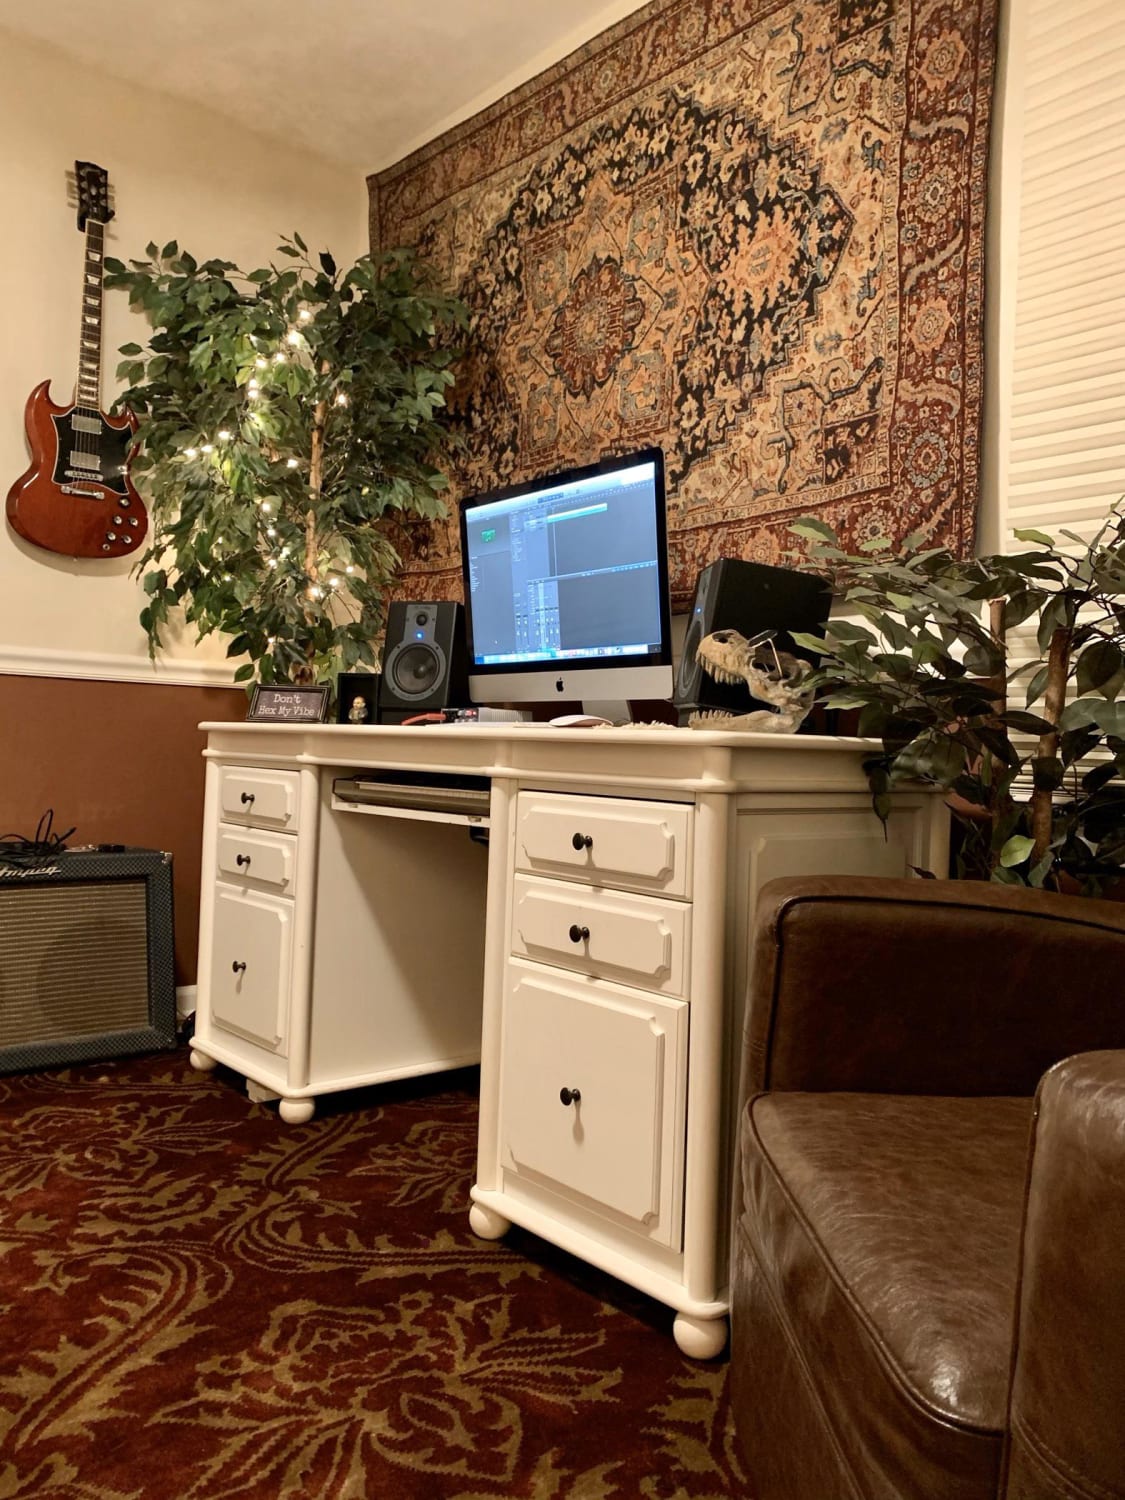 After my divorce, I finally put together a home studio. This is my cozy place.